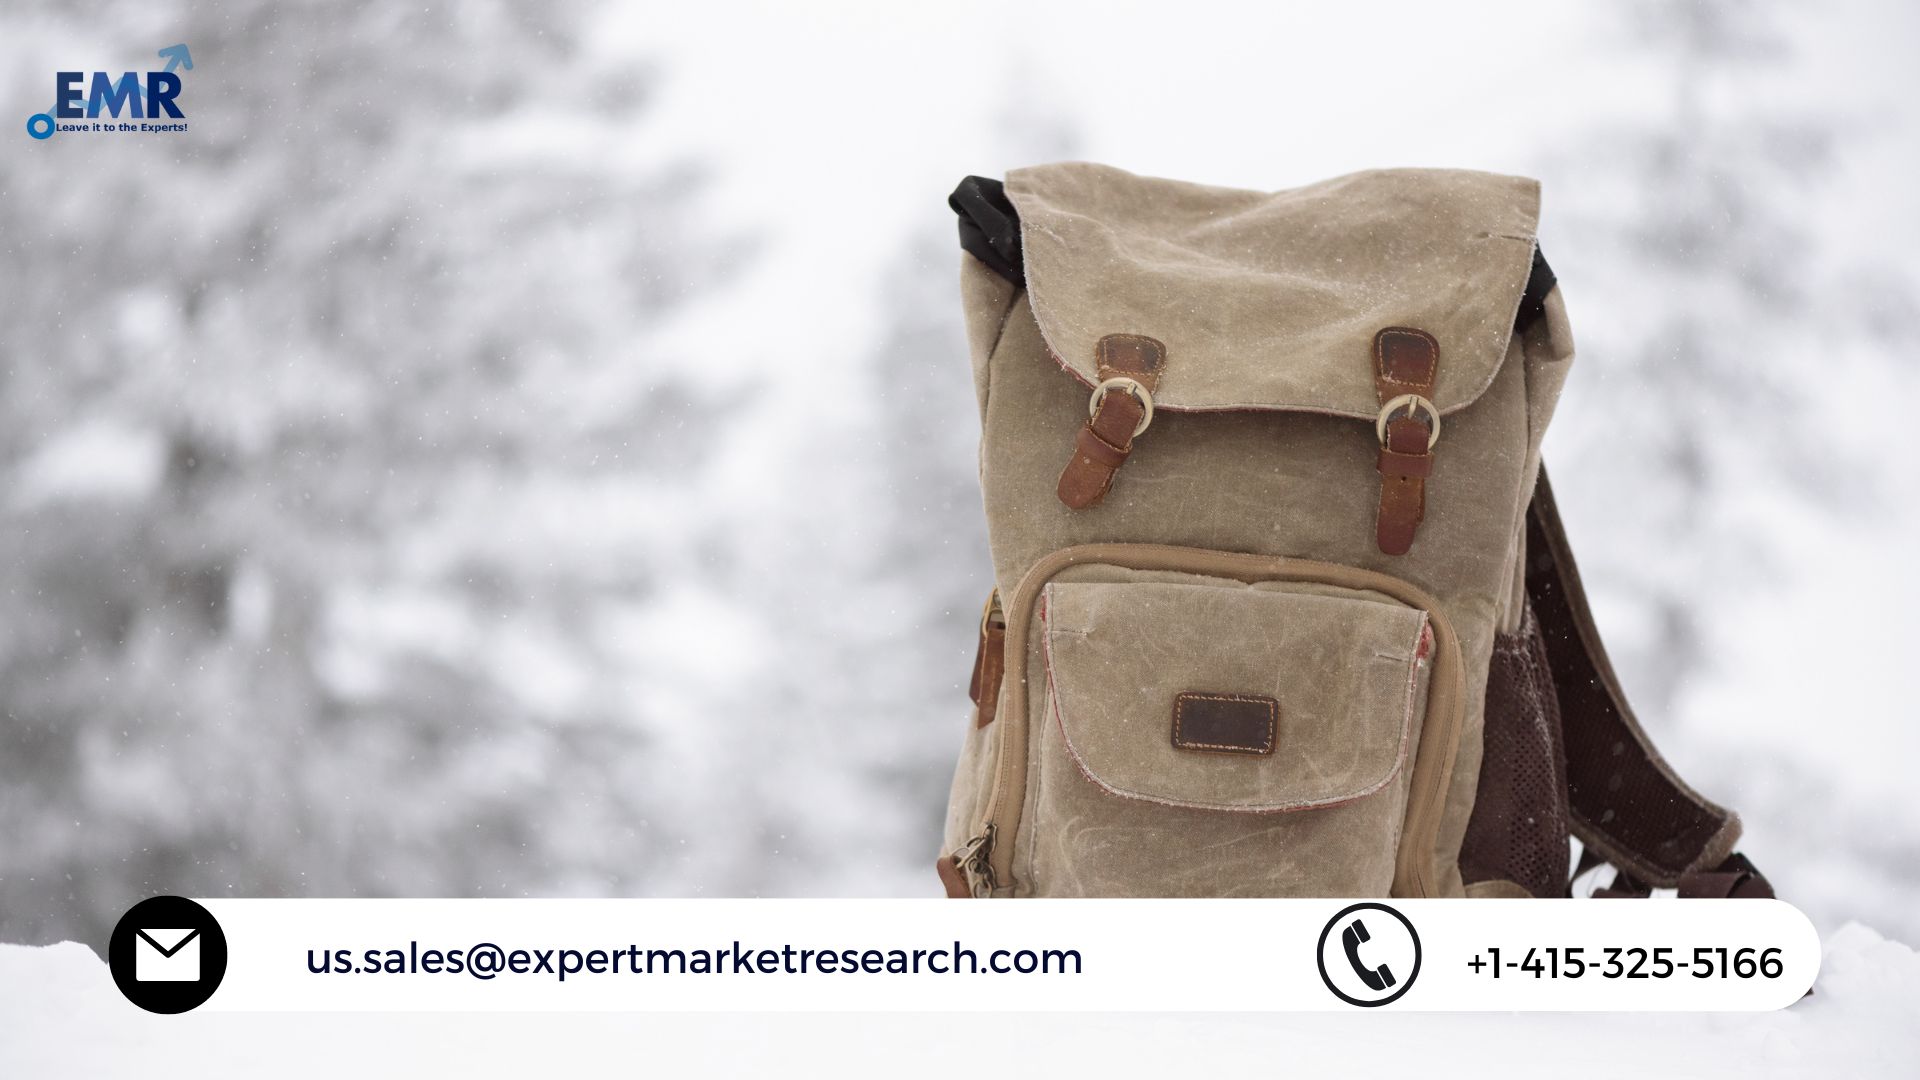 Global Backpack Market Size, Share, Price, Trends, Growth, Analysis, Key Players, Outlook, Report, Forecast 2022-2027 | EMR Inc.